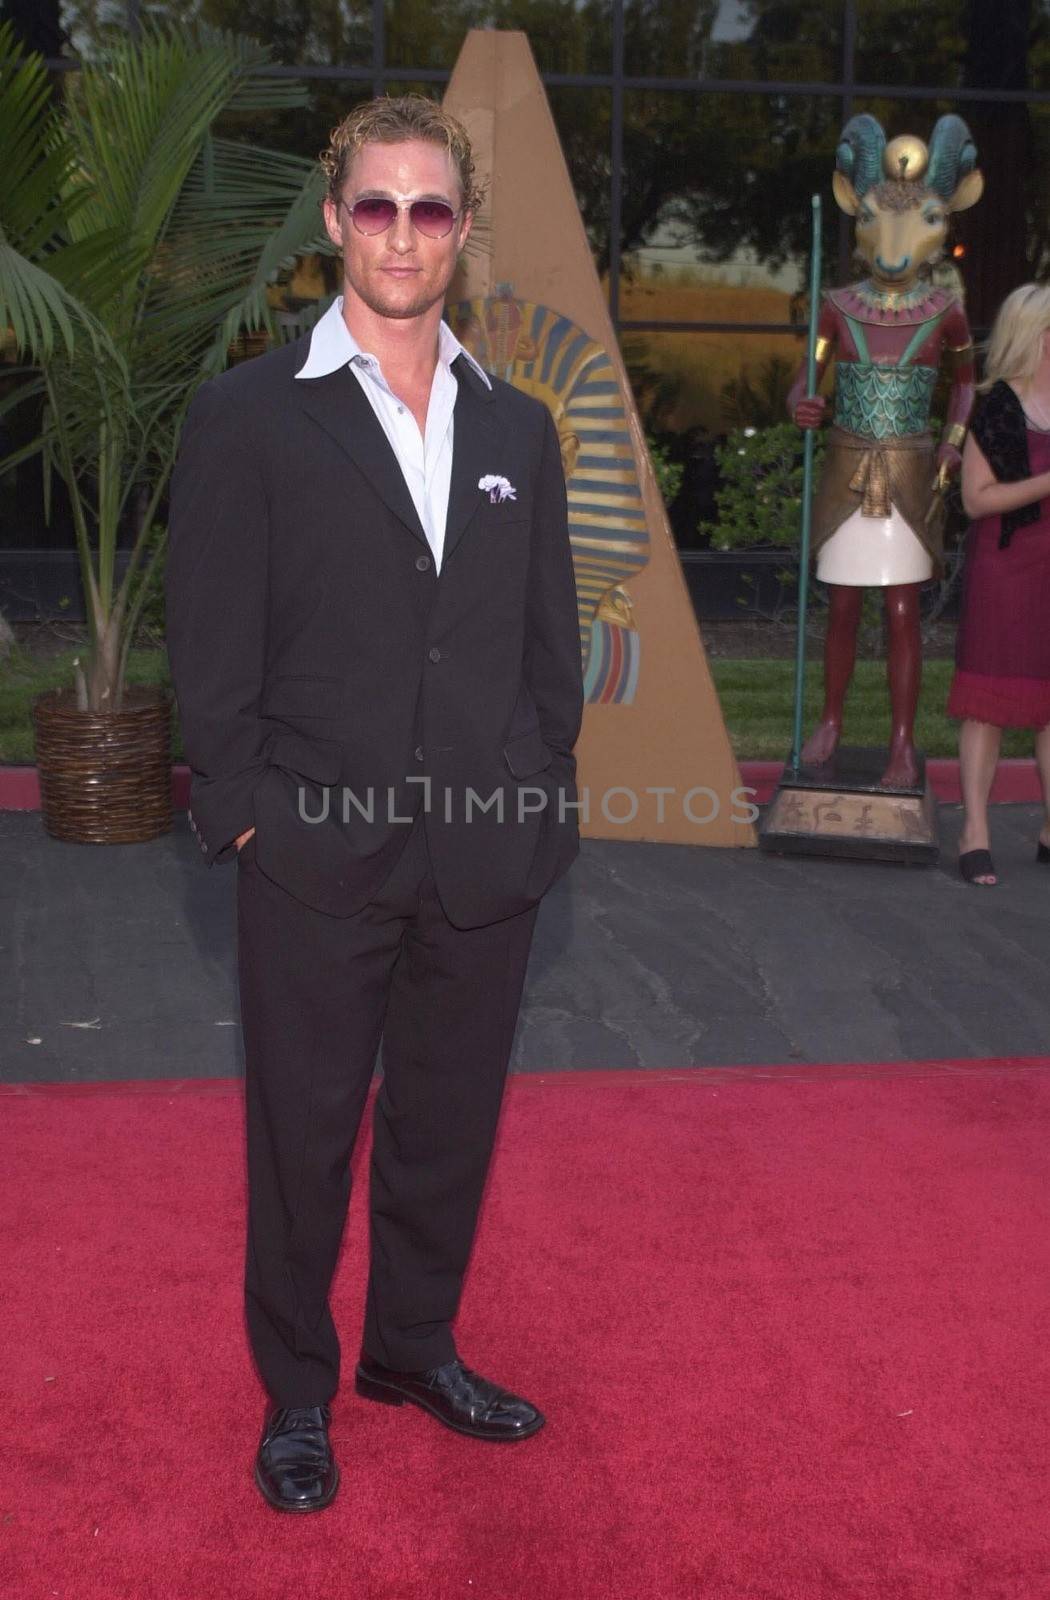 Matthew McConaughey at the Planet Hope Gala hosted by Sharon and Kelly Stone in Woodland Hills. 08-07-00